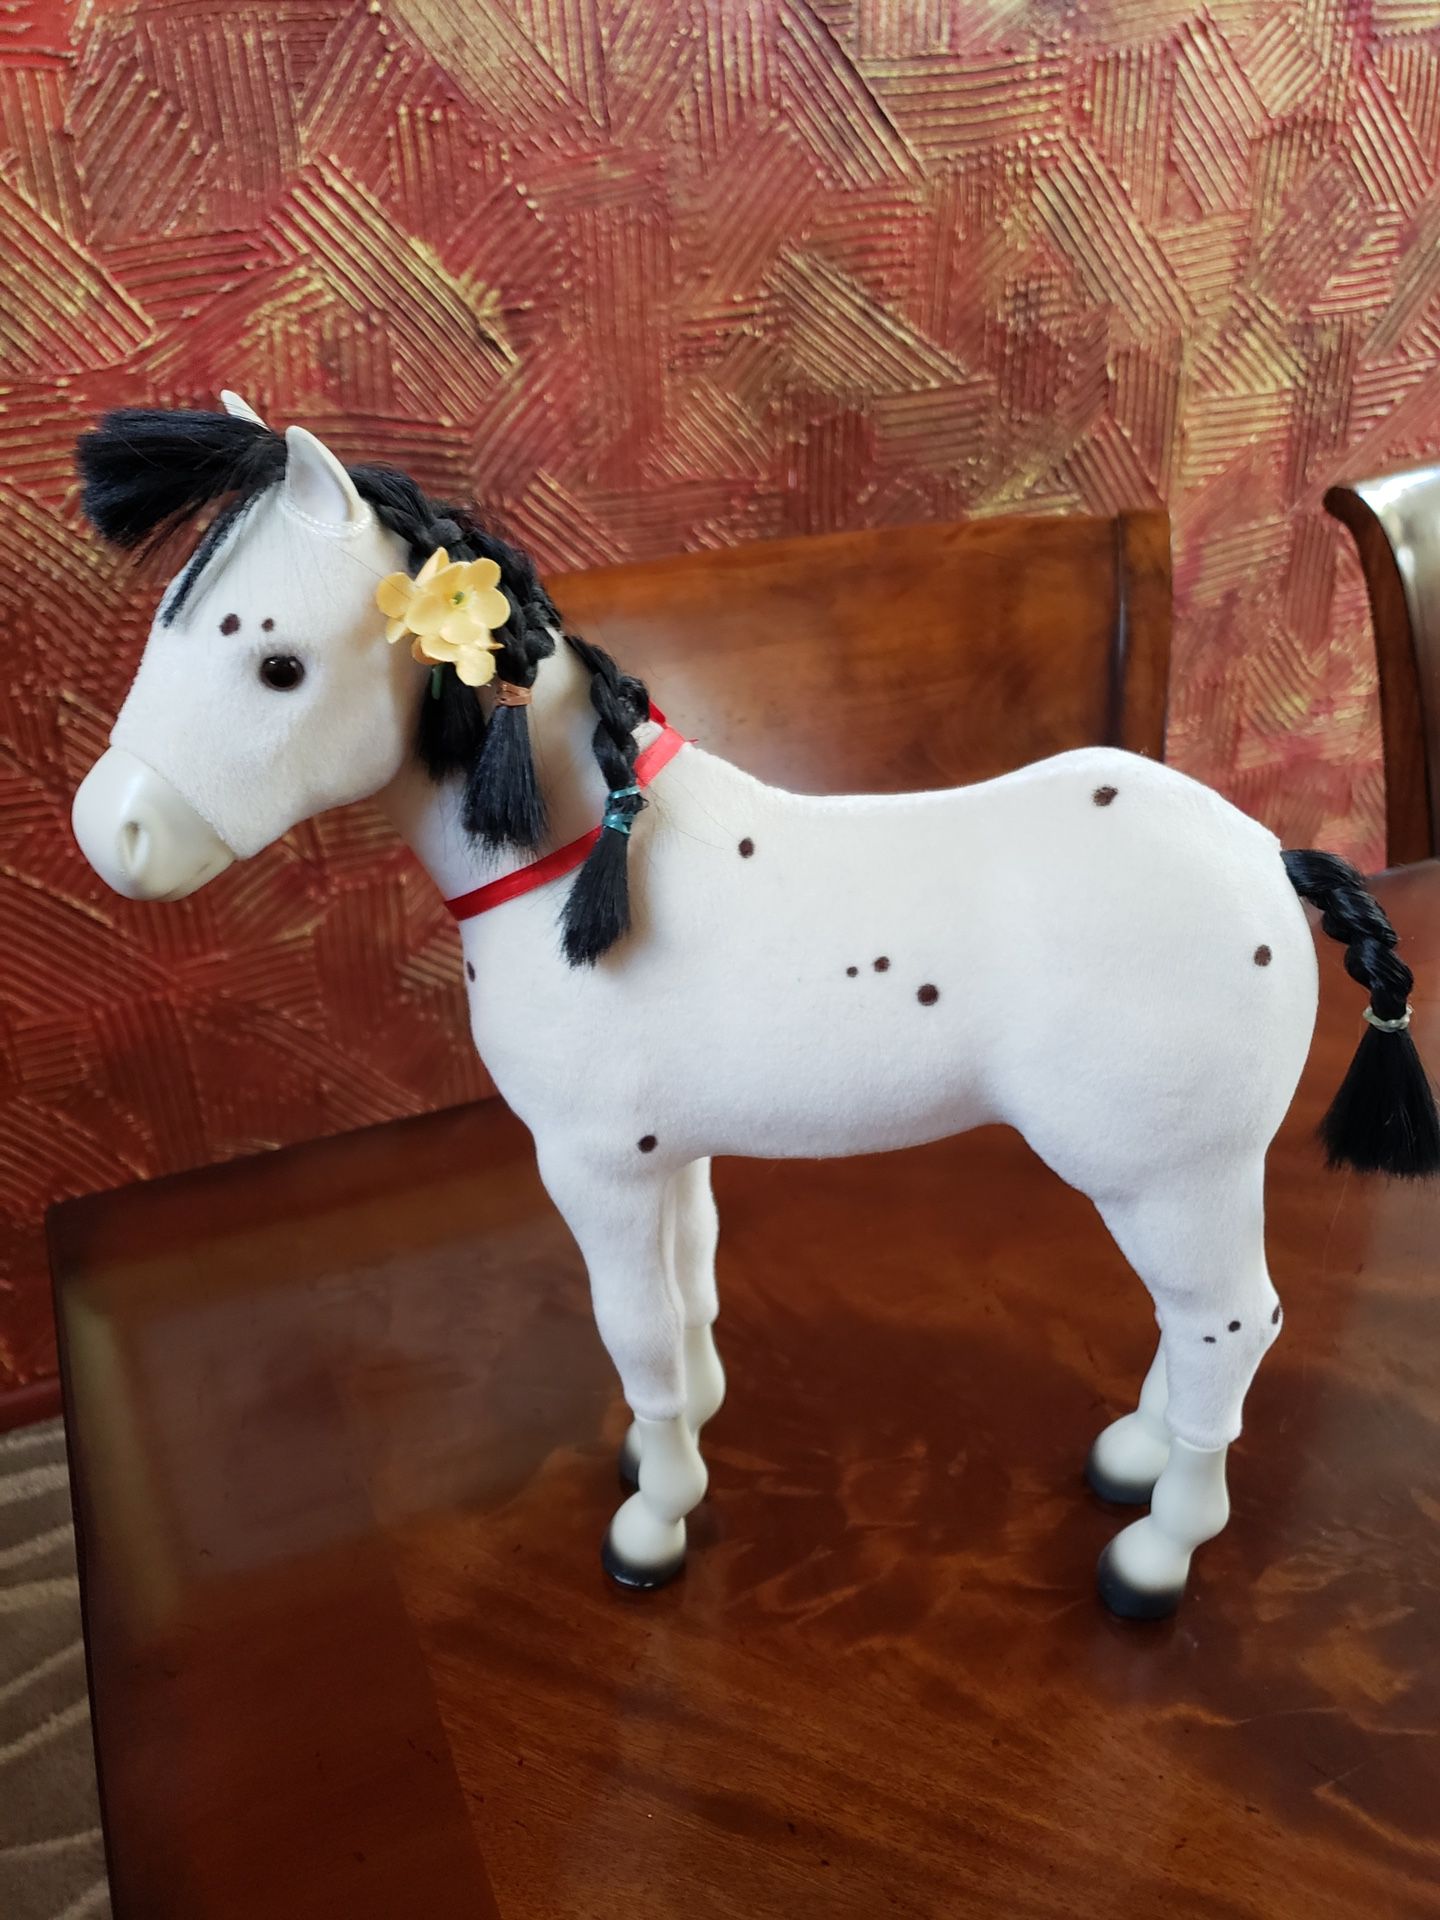 Pleasant Company - American Girl Doll Pony “Sparks Flying”